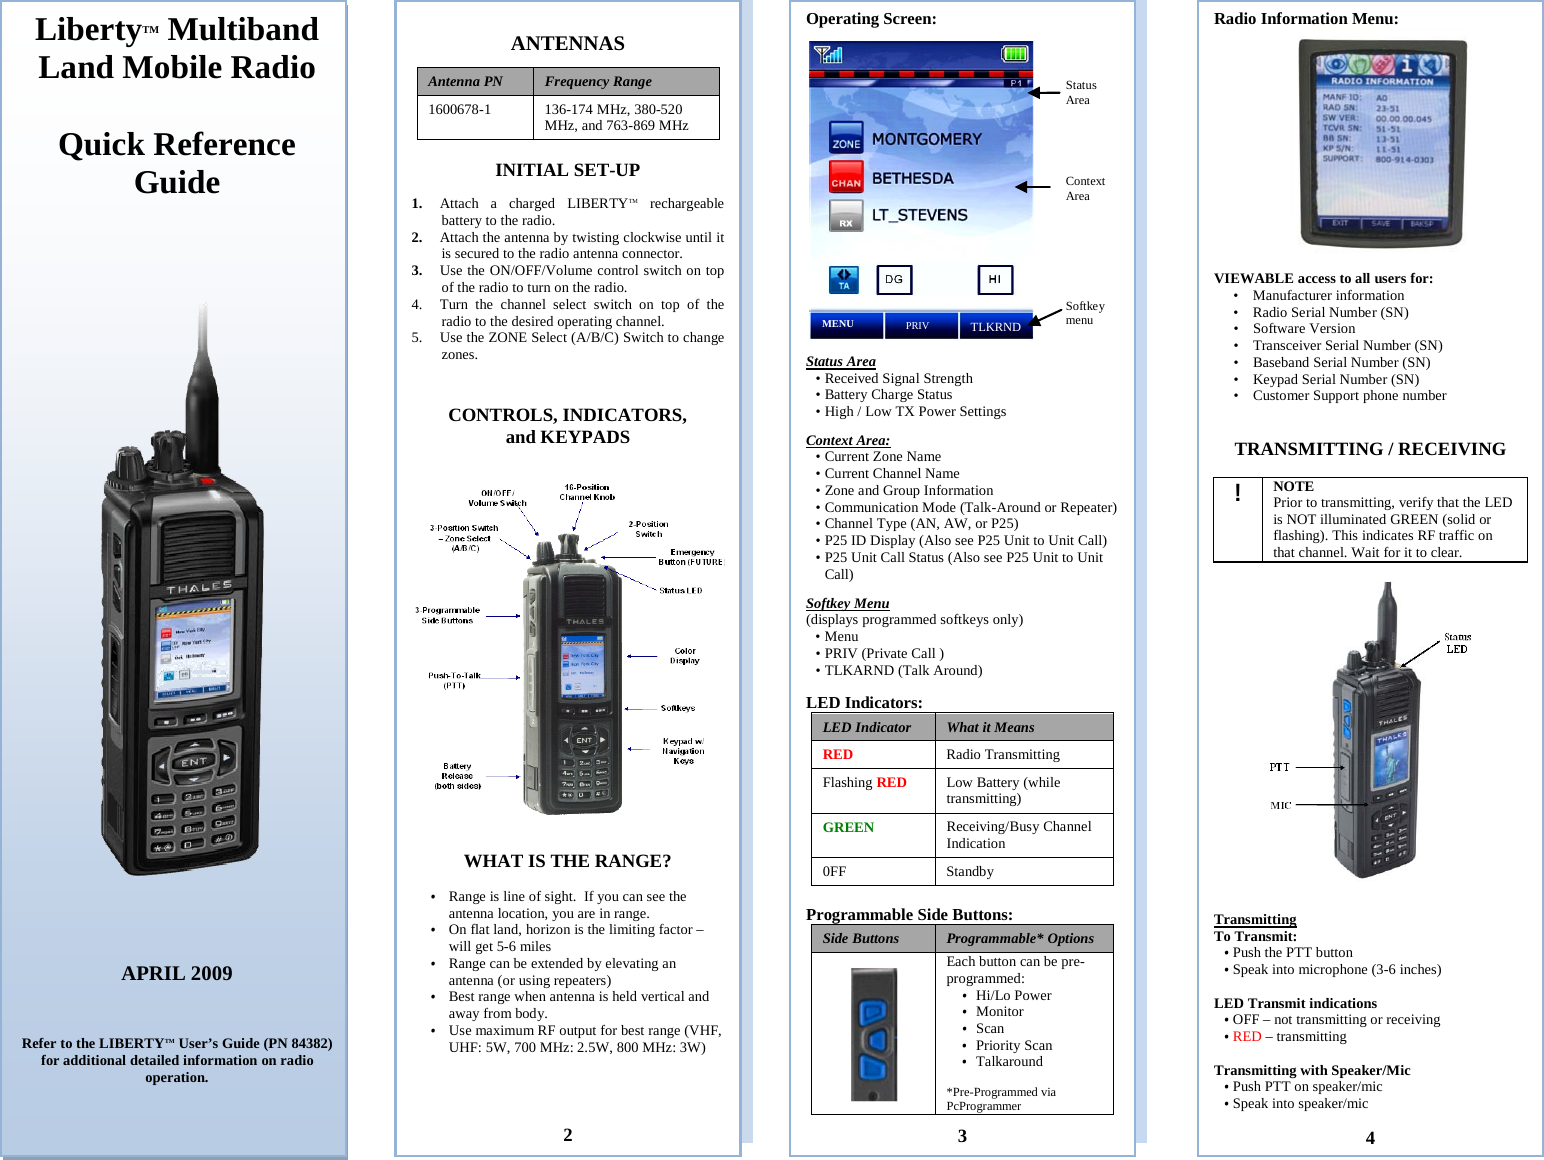 Stats Area Context area Softkey Menu  ANTENNAS  Antenna PN Frequency Range  1600678-1  136-174 MHz, 380-520 MHz, and 763-869 MHz  INITIAL SET-UP  1. Attach  a charged LIBERTYTM rechargeable battery to the radio.  2. Attach the antenna by twisting clockwise until it is secured to the radio antenna connector.  3. Use the ON/OFF/Volume control switch on top of the radio to turn on the radio. 4. Turn the channel select switch on top of the radio to the desired operating channel. 5. Use the ZONE Select (A/B/C) Switch to change zones.   CONTROLS, INDICATORS, and KEYPADS     WHAT IS THE RANGE?  • Range is line of sight.  If you can see the antenna location, you are in range. • On flat land, horizon is the limiting factor – will get 5-6 miles  • Range can be extended by elevating an antenna (or using repeaters) • Best range when antenna is held vertical and away from body.  • Use maximum RF output for best range (VHF, UHF: 5W, 700 MHz: 2.5W, 800 MHz: 3W)               2 Operating Screen:     Status Area  • Received Signal Strength • Battery Charge Status • High / Low TX Power Settings  Context Area: • Current Zone Name  • Current Channel Name   • Zone and Group Information • Communication Mode (Talk-Around or Repeater)  • Channel Type (AN, AW, or P25) • P25 ID Display (Also see P25 Unit to Unit Call) • P25 Unit Call Status (Also see P25 Unit to Unit Call)  Softkey Menu (displays programmed softkeys only) • Menu  • PRIV (Private Call ) • TLKARND (Talk Around)     LED Indicators: LED Indicator What it Means RED Radio Transmitting Flashing RED Low Battery (while transmitting) GREEN Receiving/Busy Channel Indication 0FF Standby  Programmable Side Buttons:   Side Buttons  Programmable* Options  Each button can be pre-programmed: • Hi/Lo Power • Monitor • Scan • Priority Scan • Talkaround  *Pre-Programmed via PcProgrammer   3 LibertyTM Multiband Land Mobile Radio  Quick Reference Guide        APRIL 2009    Refer to the LIBERTYTM User’s Guide (PN 84382) for additional detailed information on radio operation.     Radio Information Menu:   VIEWABLE access to all users for: • Manufacturer information • Radio Serial Number (SN) • Software Version • Transceiver Serial Number (SN) • Baseband Serial Number (SN) • Keypad Serial Number (SN) • Customer Support phone number   TRANSMITTING / RECEIVING  ! NOTE Prior to transmitting, verify that the LED is NOT illuminated GREEN (solid or flashing). This indicates RF traffic on that channel. Wait for it to clear.    Transmitting To Transmit:  • Push the PTT button • Speak into microphone (3-6 inches)  LED Transmit indications • OFF – not transmitting or receiving • RED – transmitting  Transmitting with Speaker/Mic  • Push PTT on speaker/mic  • Speak into speaker/mic     4 Status Area Context Area Softkey menu MENU PRIV TLKRND 